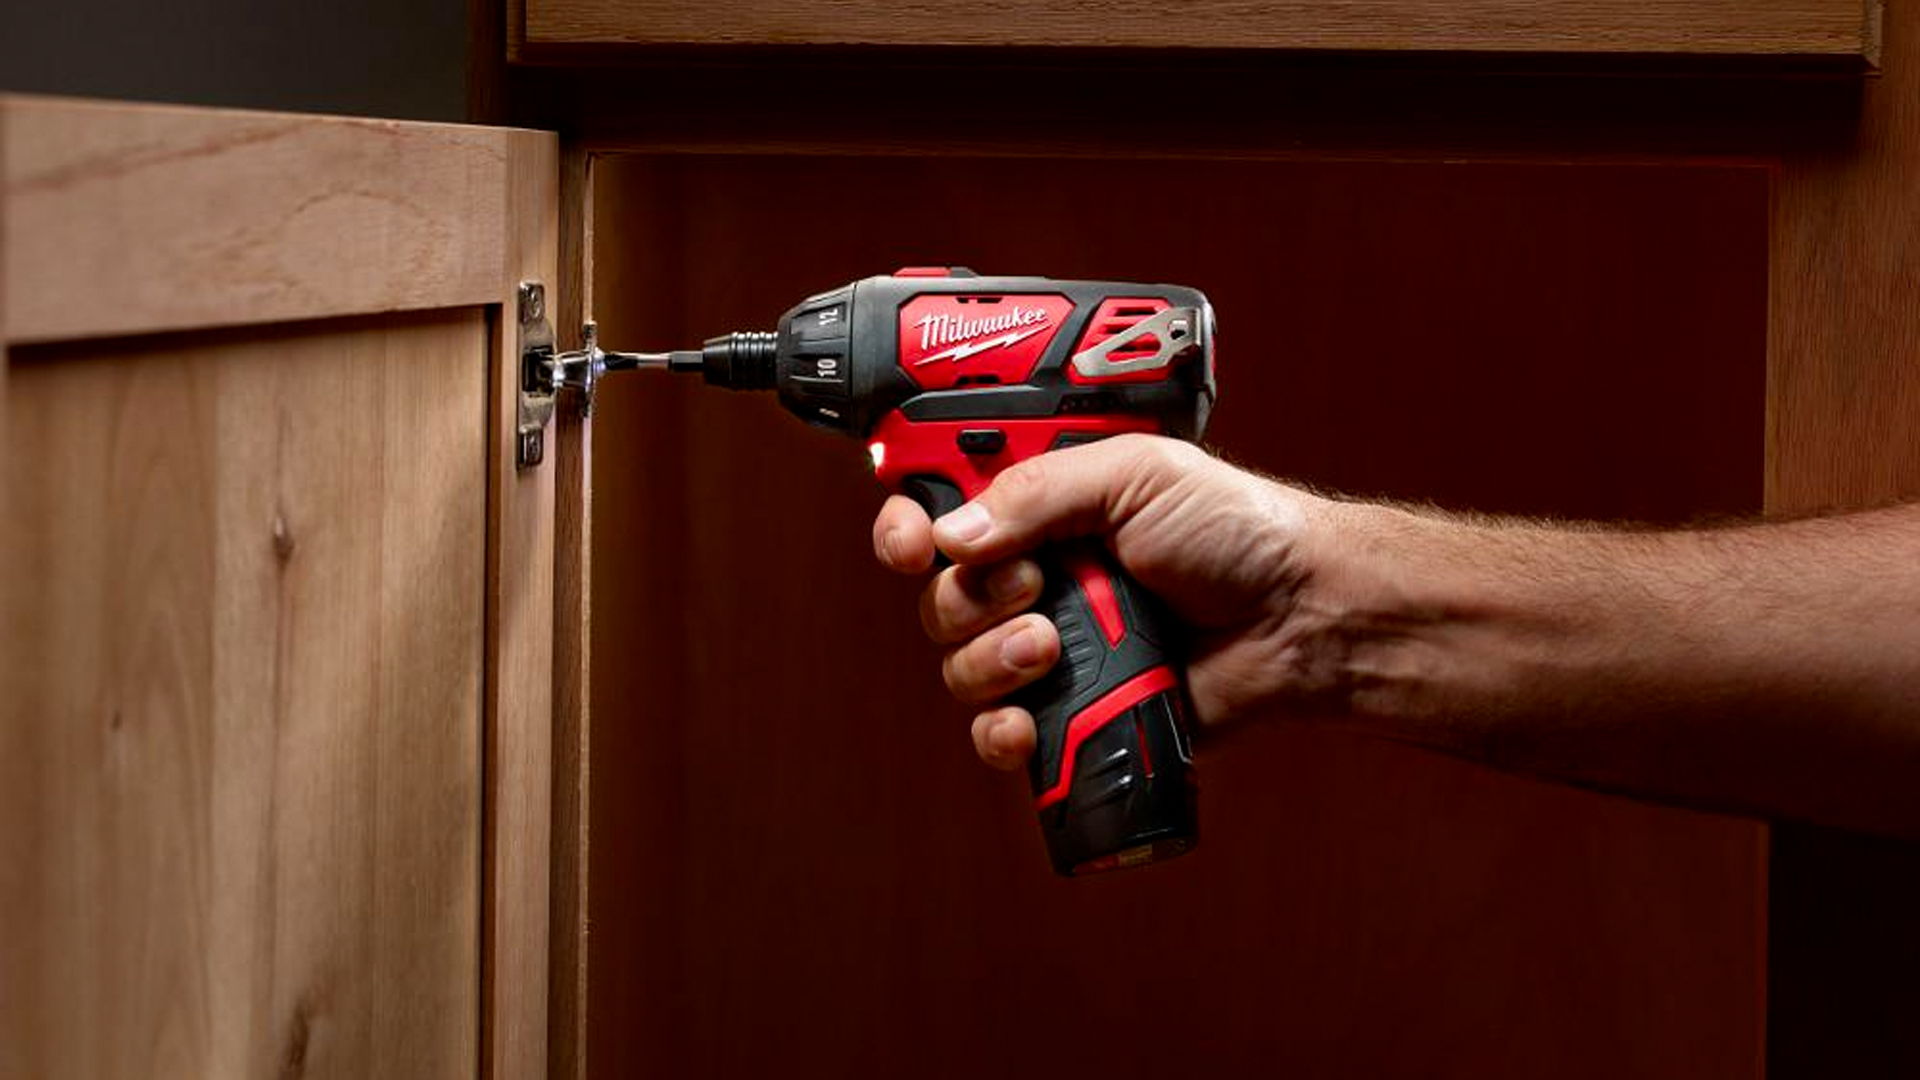 Home Depot Launches New Milwaukee Tool Sale With Up To 40 Off Combo Kits 9to5toys